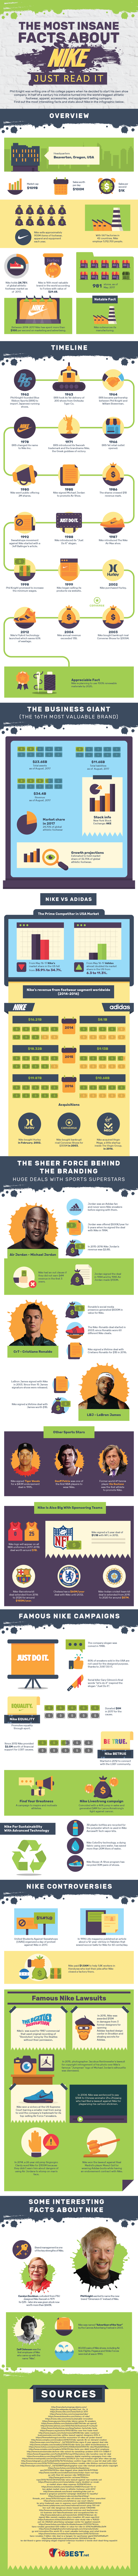 Infographic - The Most Insane Facts About Nike